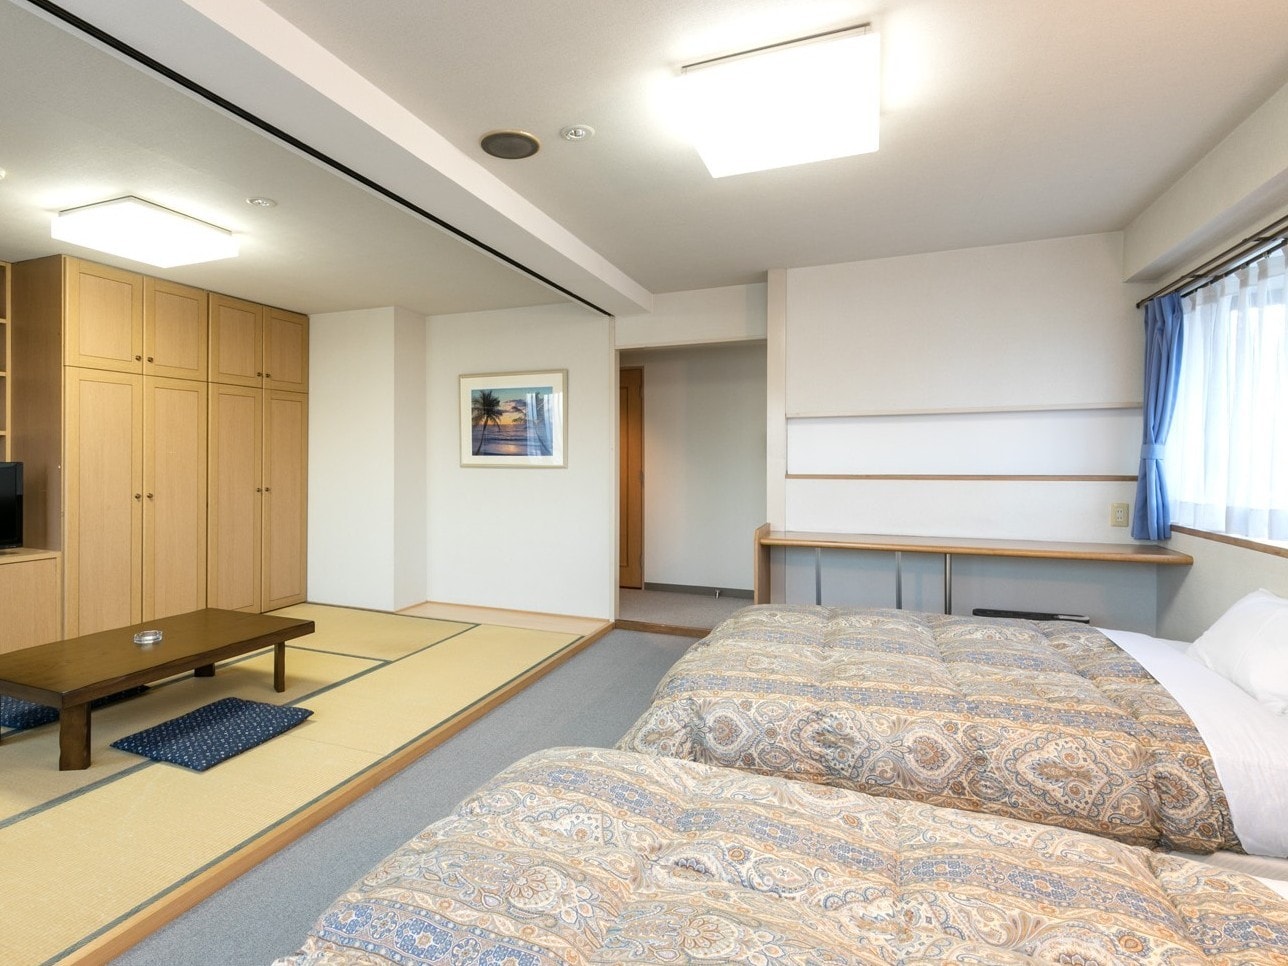 Recommended for Japanese and Western families, 2 double beds